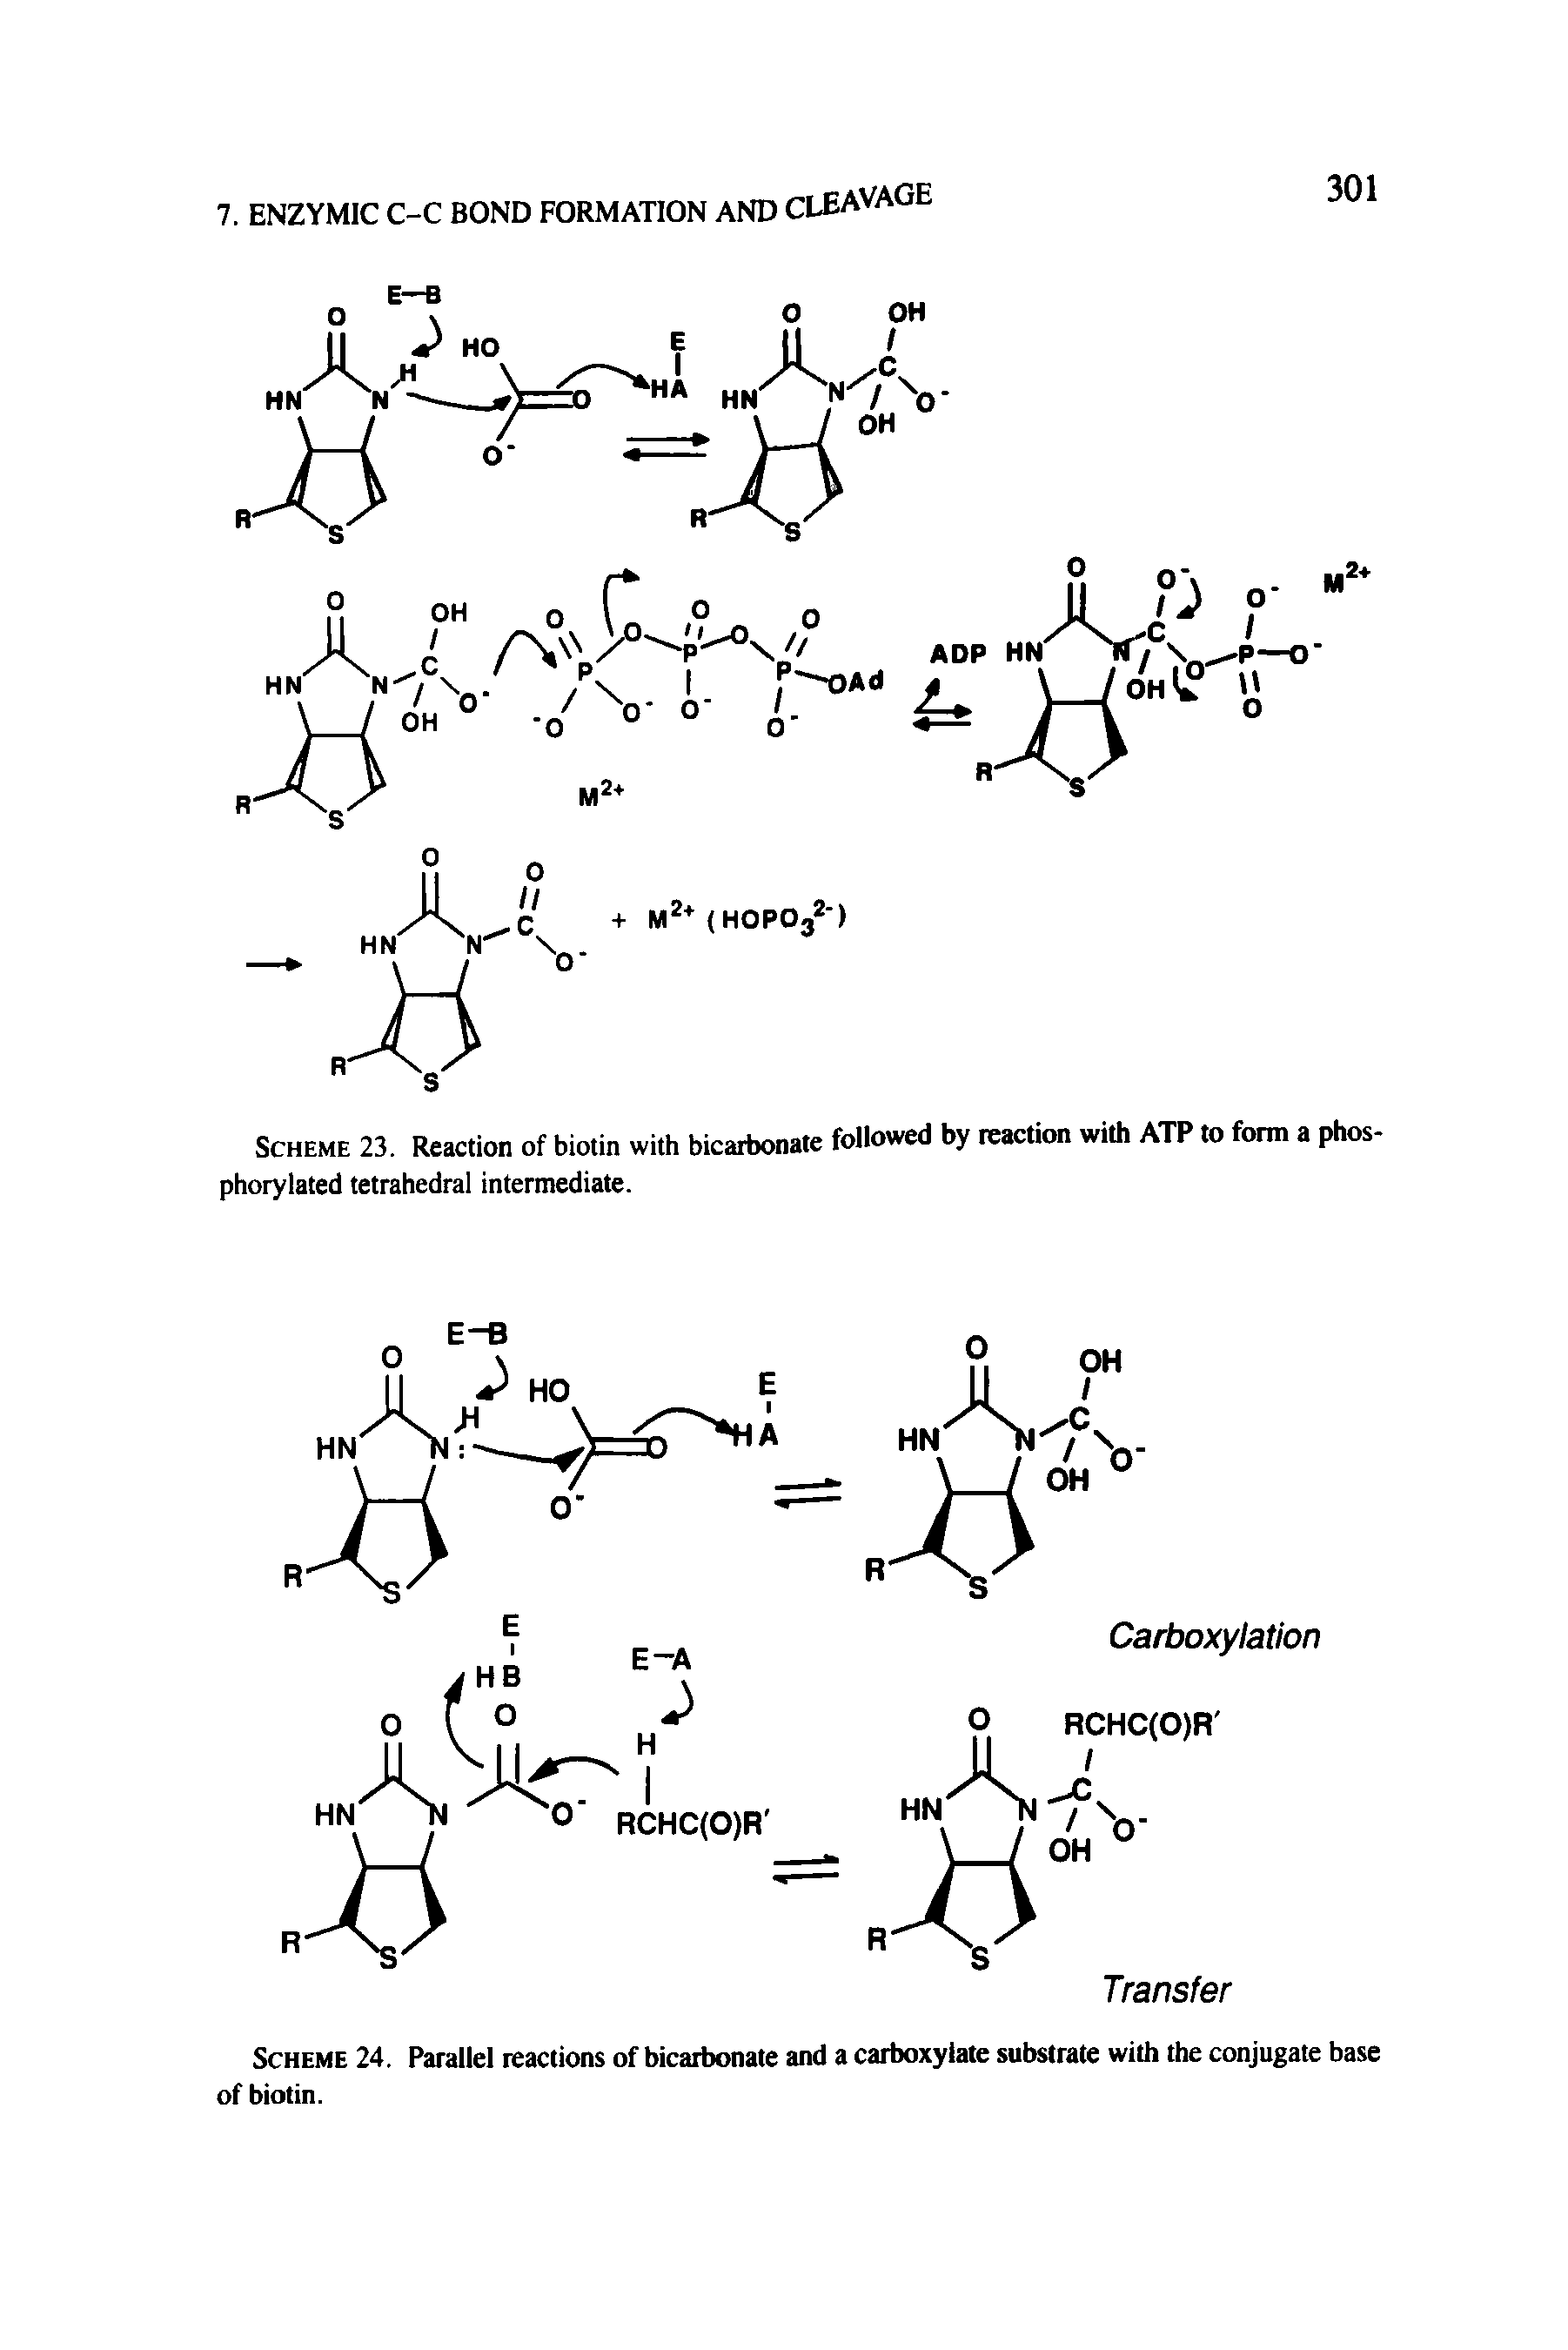 Scheme 24. Parallel reactions of bicarbonate and a carboxylate substrate with the conjugate base of biotin.